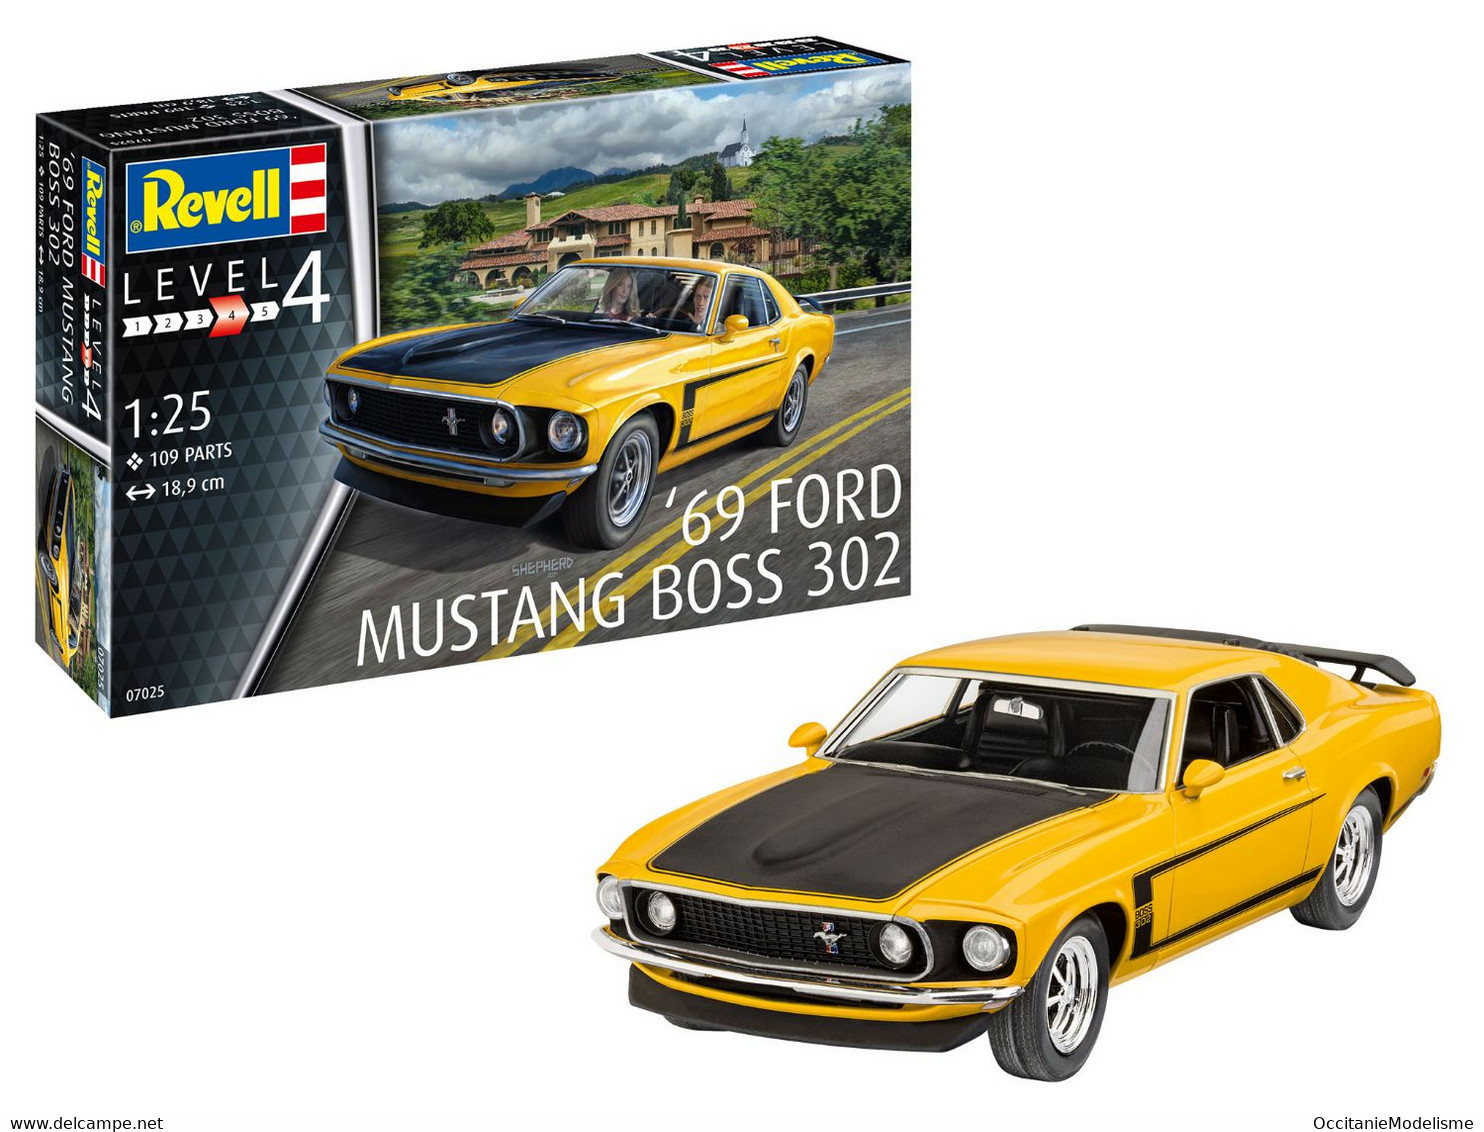 Revell - FORD MUSTANG BOSS 302 1969 Maquette Kit Plastique Réf. 07025 Neuf 1/25 - Autos